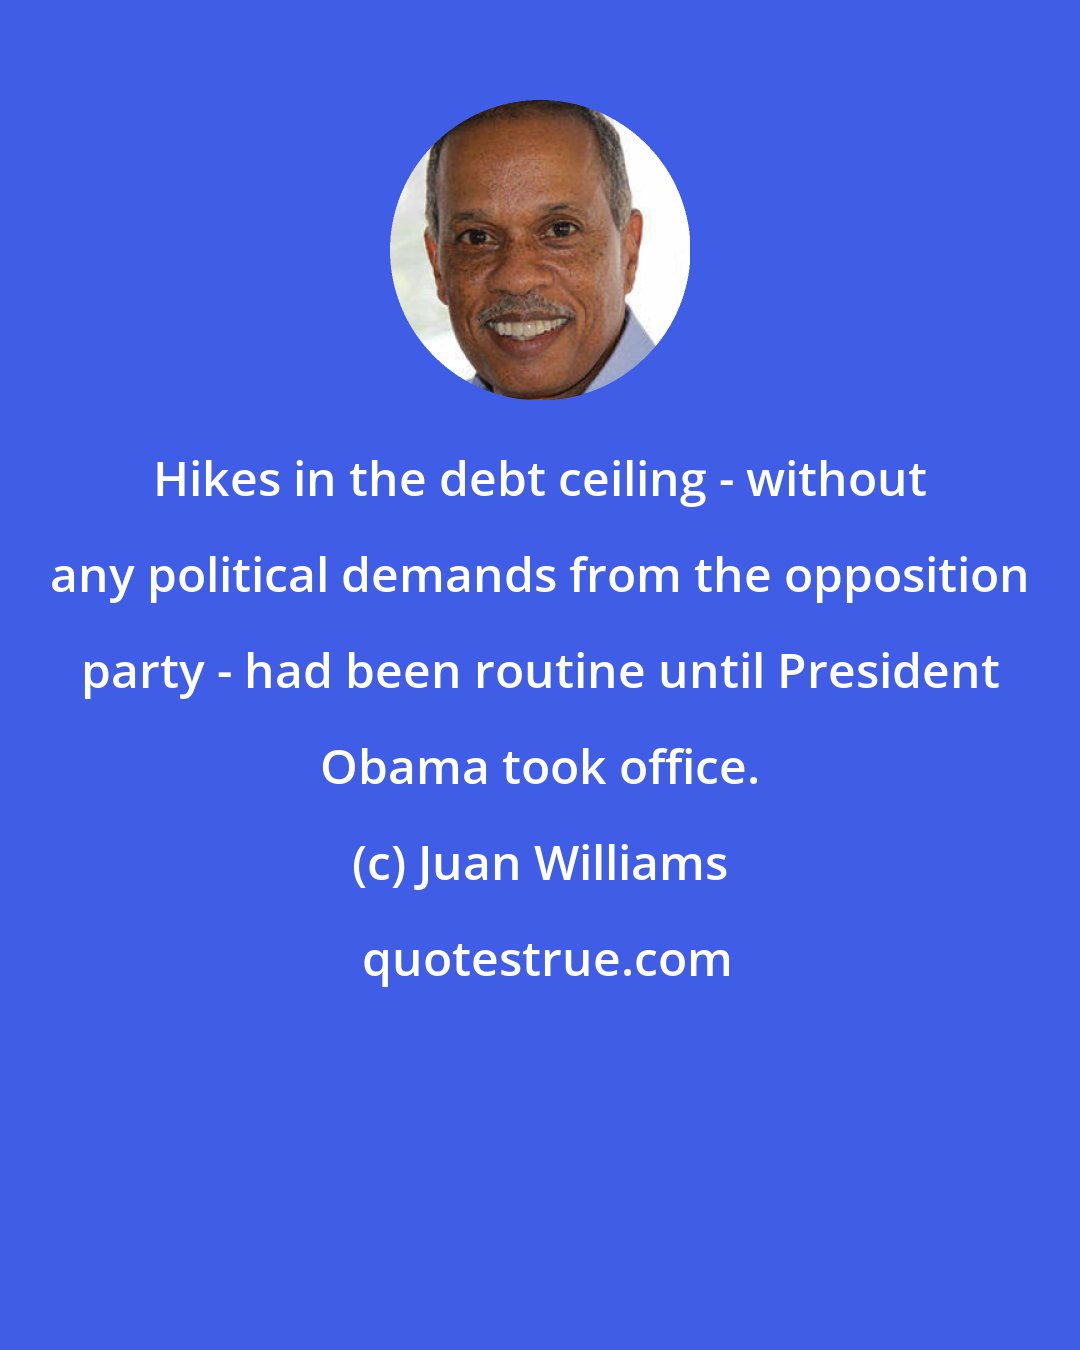 Juan Williams: Hikes in the debt ceiling - without any political demands from the opposition party - had been routine until President Obama took office.